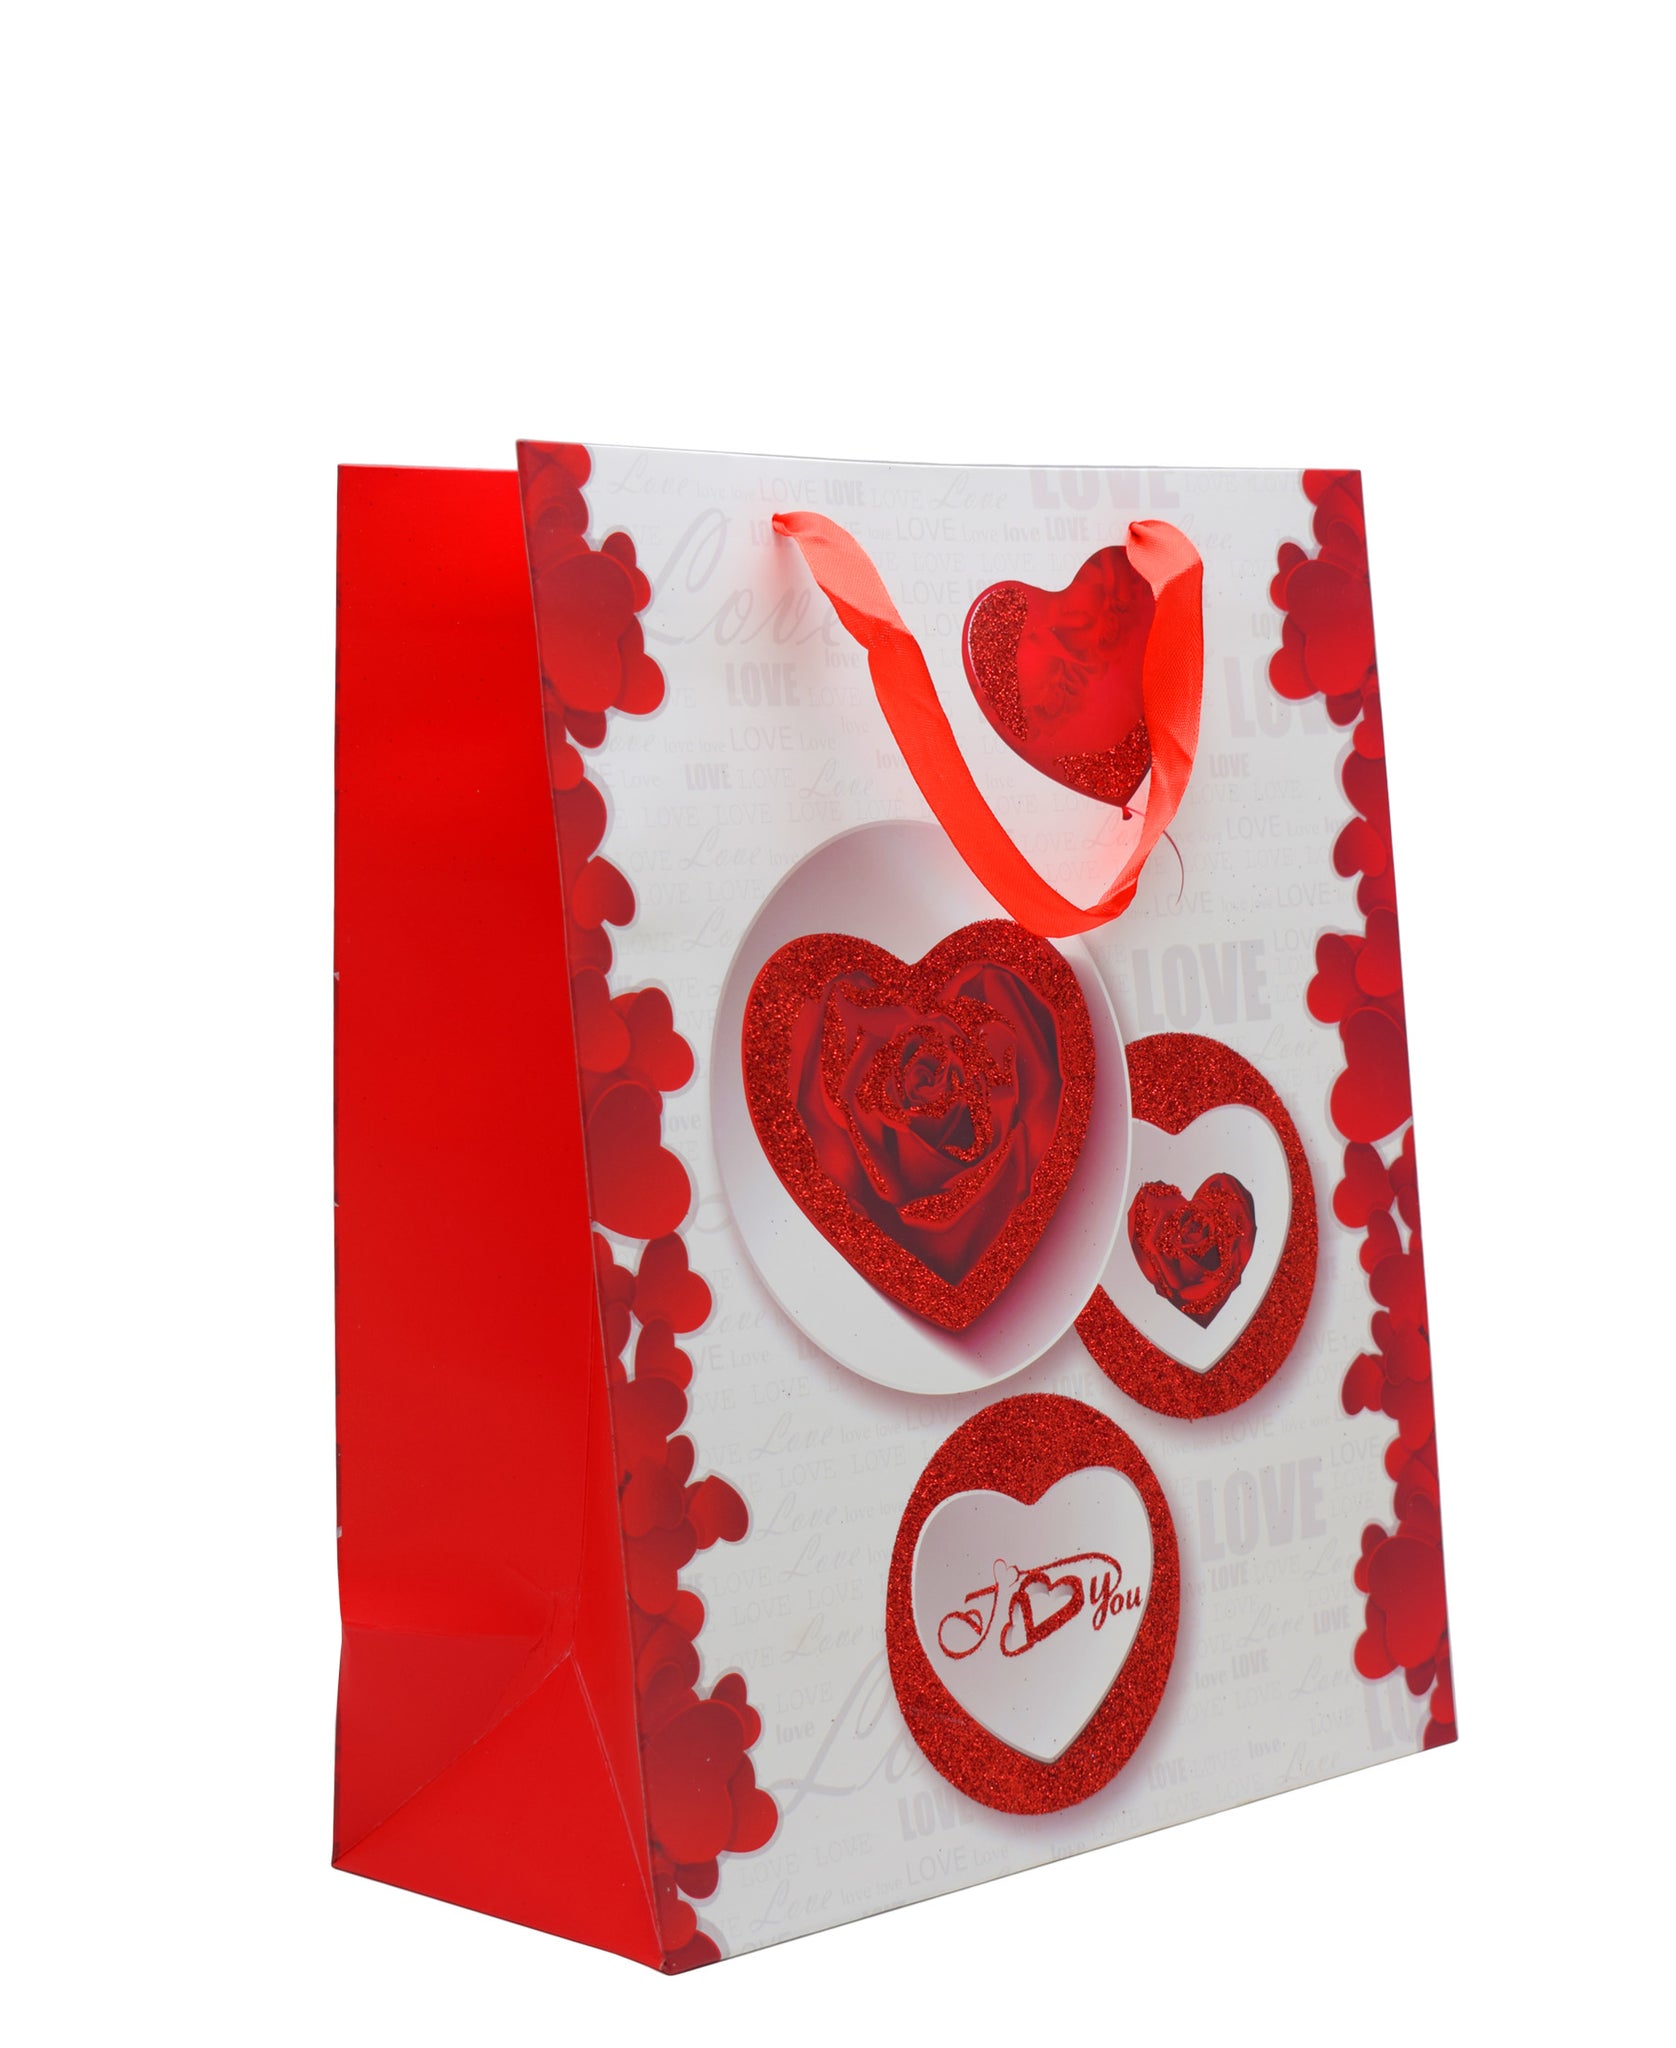 Urban Decor Gift Bags 4 Hearts - Red & White